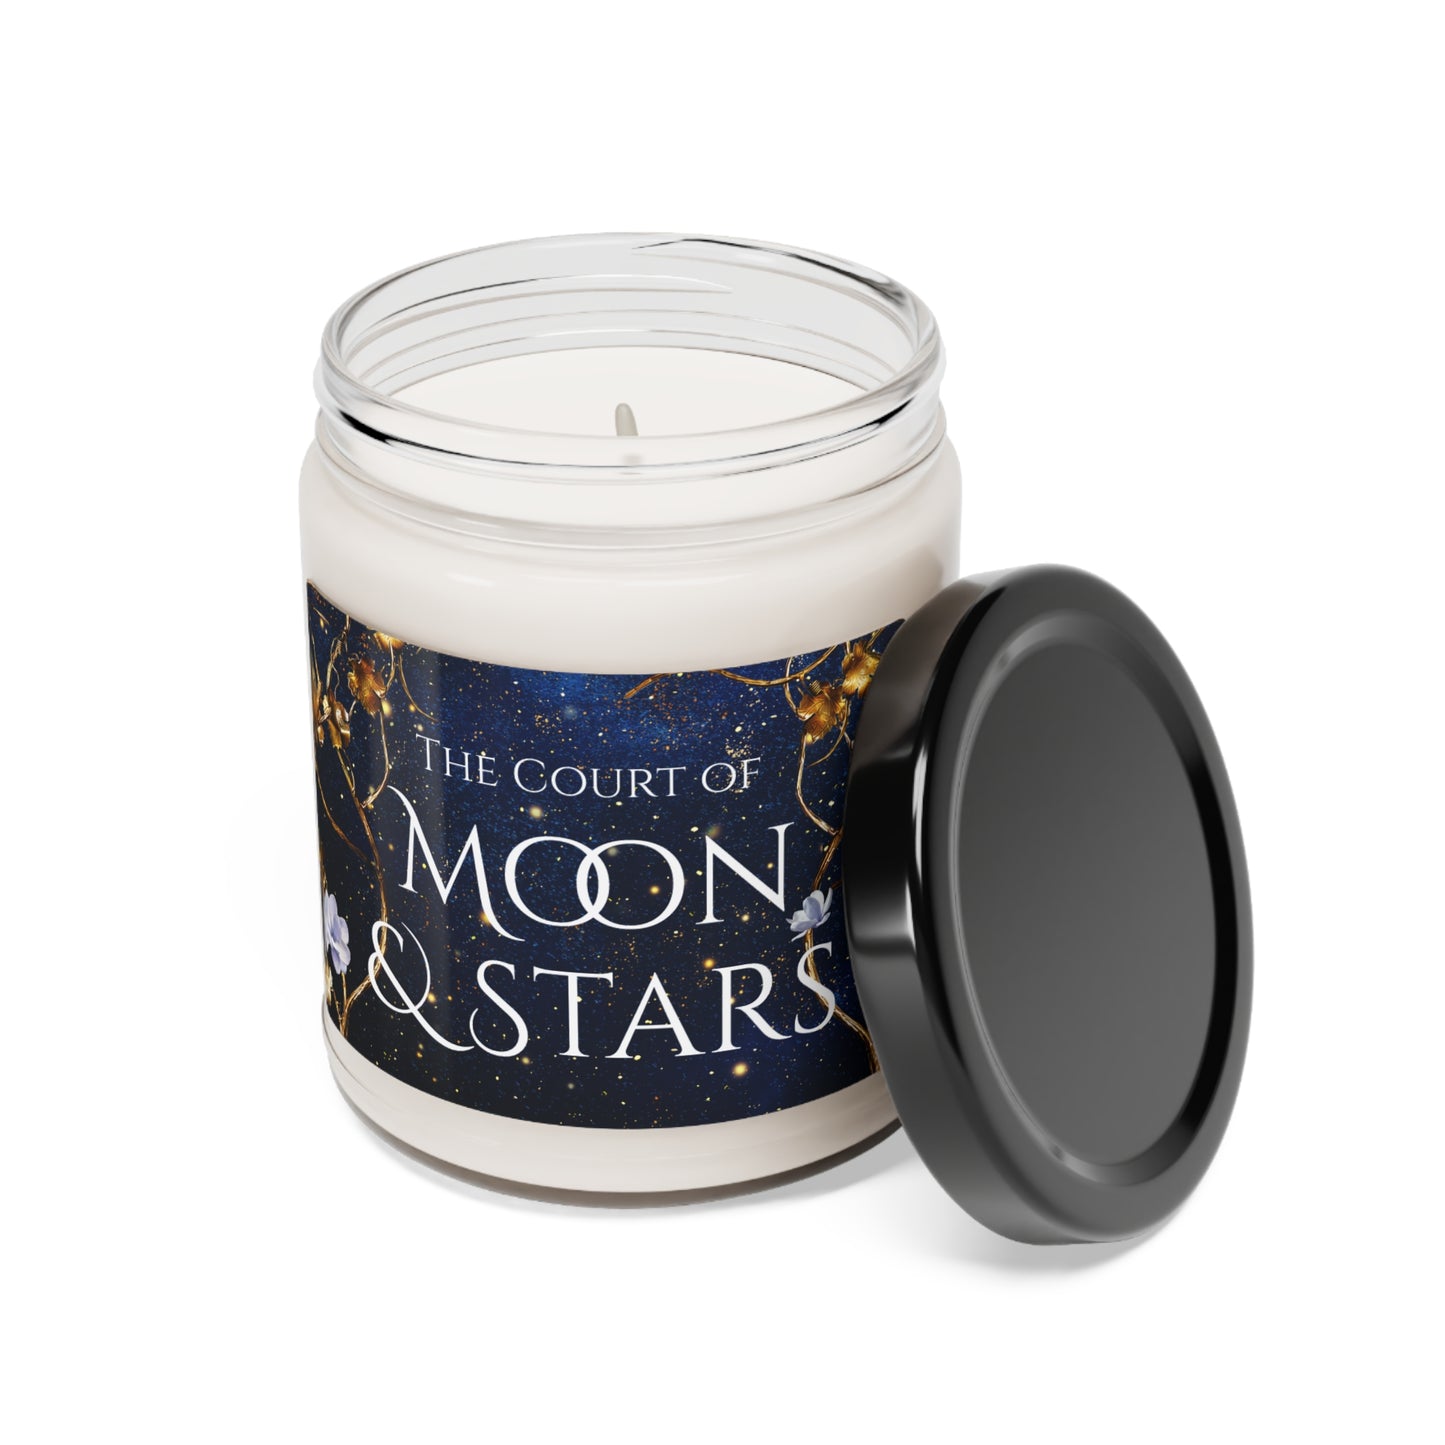 The Court of Moon and Stars Scented Soy Candle, 9oz